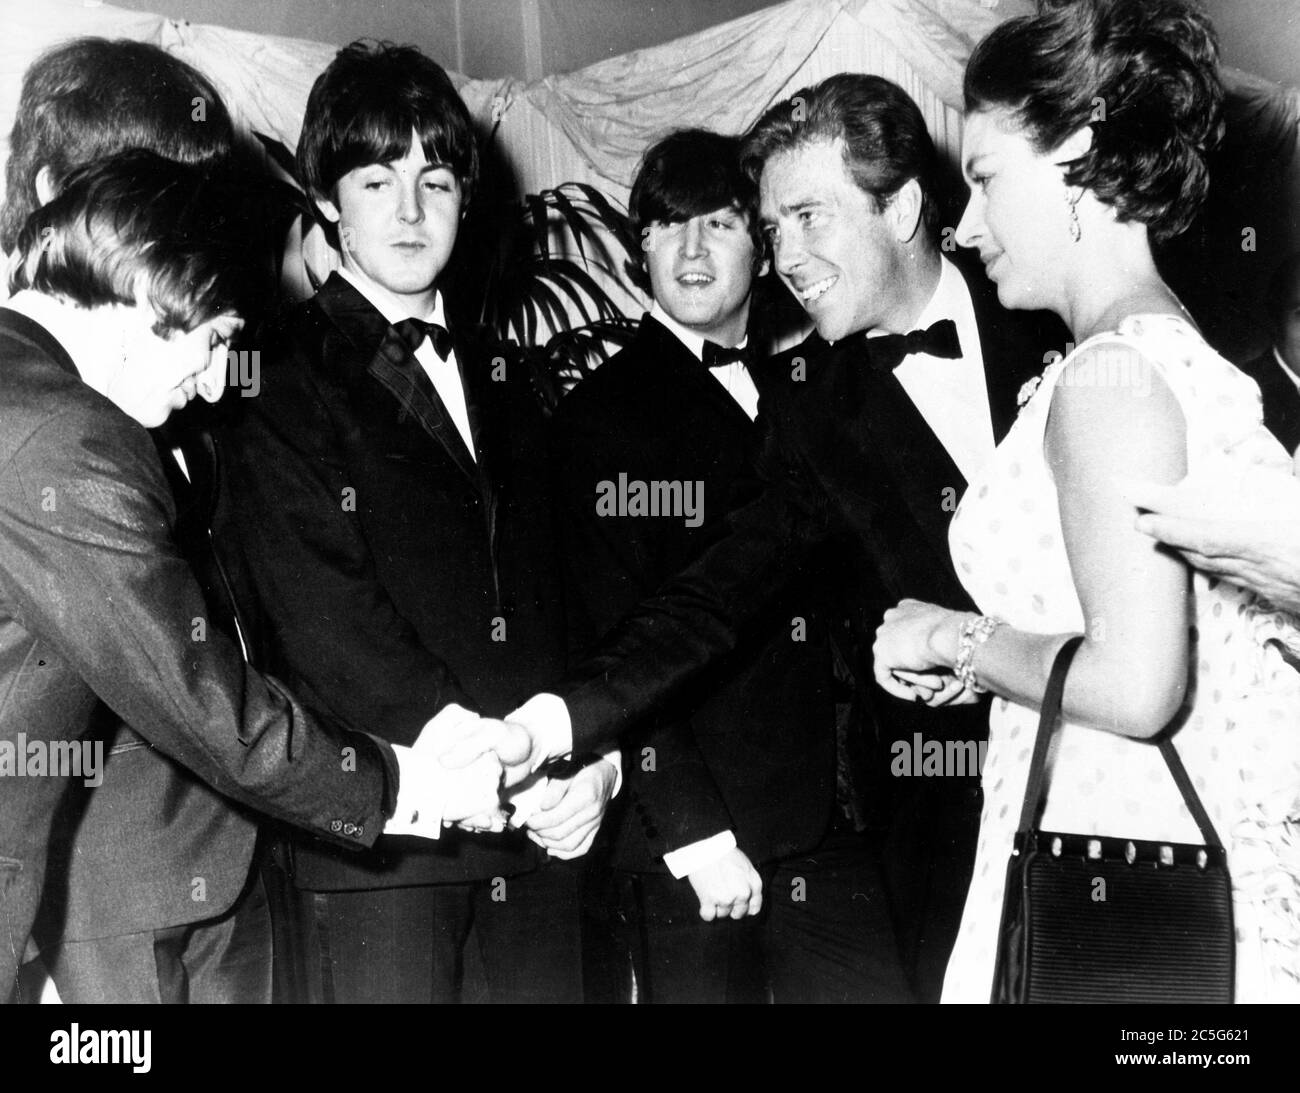 July 30, 1965 - London, England, United Kingdom - H.R.H. PRINCESS MARGARET, right, accompanied by her husband LORD SNOWDON, second from right, at the world premiere of THE BEATLES new film 'Help', which took place at the London Pavilion. Lord Snowdon shakes hands with RINGO STARR, left, as the Princess, PAUL McCARTNEY, second from left, JOHN LENNON, center, and The Beatles meet at the screening of the film.  (Credit Image: © Keystone Press Agency/Keystone USA via ZUMAPRESS.com) Stock Photo